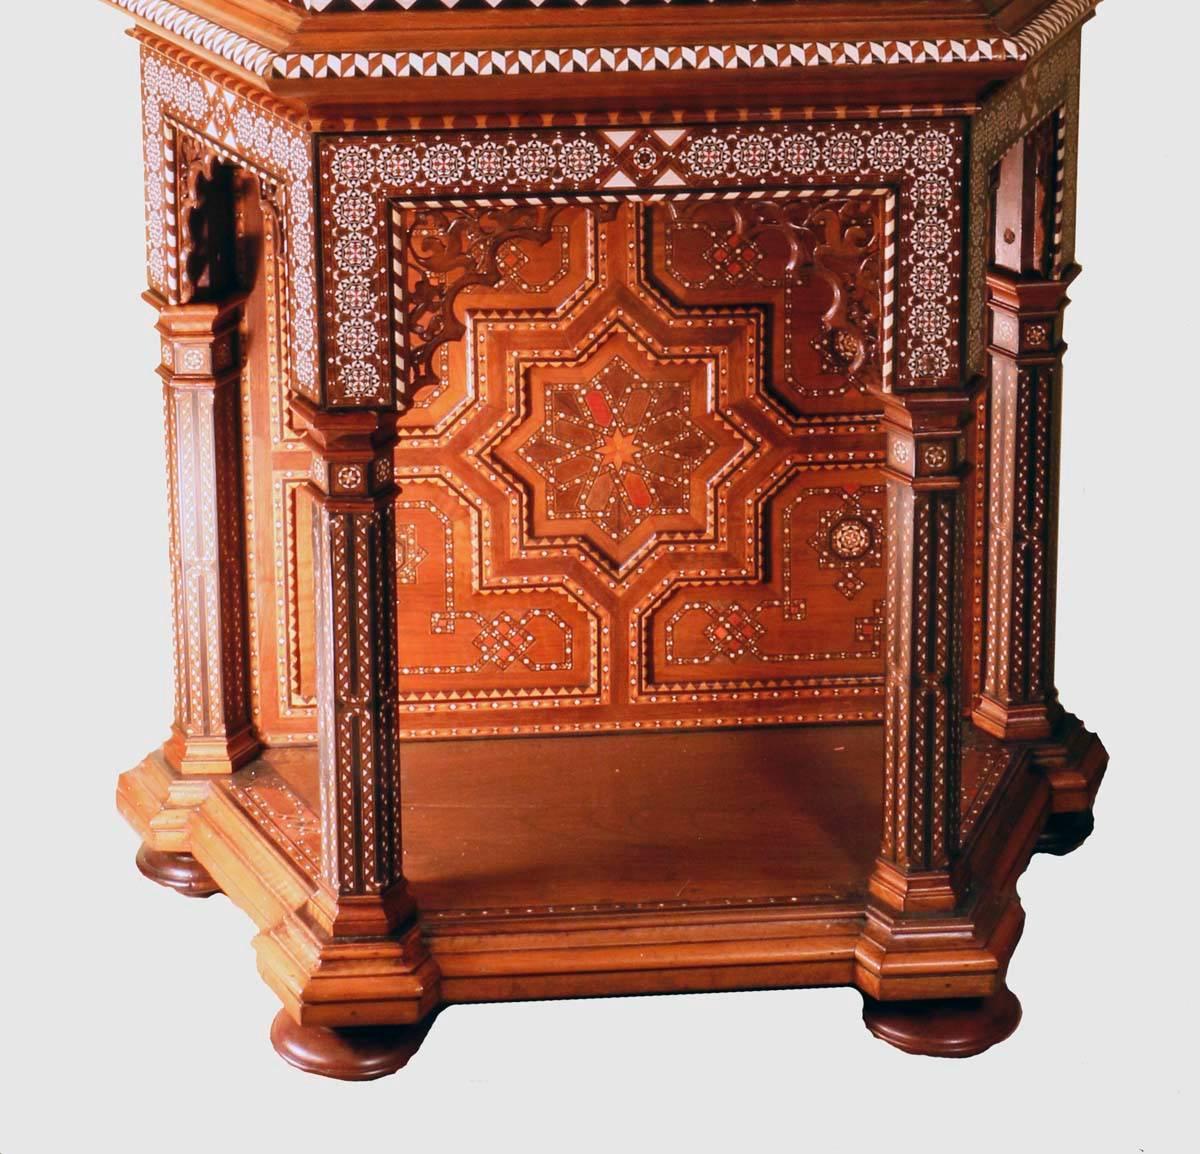 A sumptuous antique ottoman walnut cabinet, the upper section enclosed by a single glazed door, the stand flanked by paneled columns; both sections are profusely inlaid with parquetry and geometric designs. Below the cornice runs a band of pious